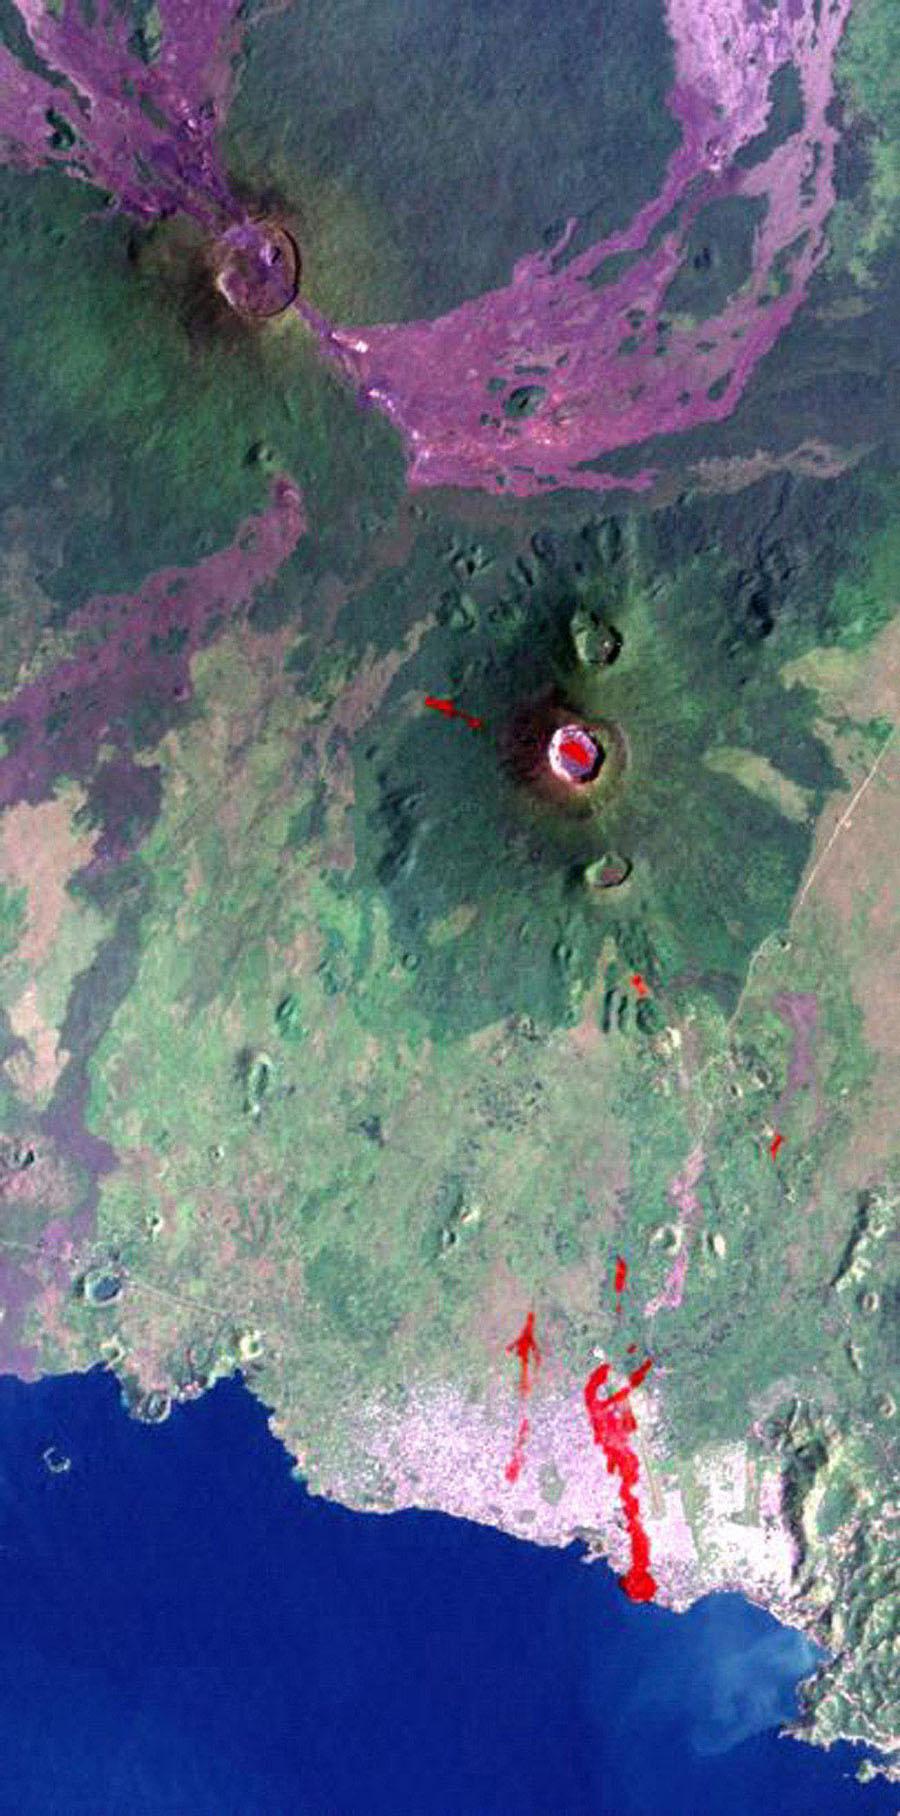 Space Image. Nyiragongo Volcano, Congo, Map View with Lava